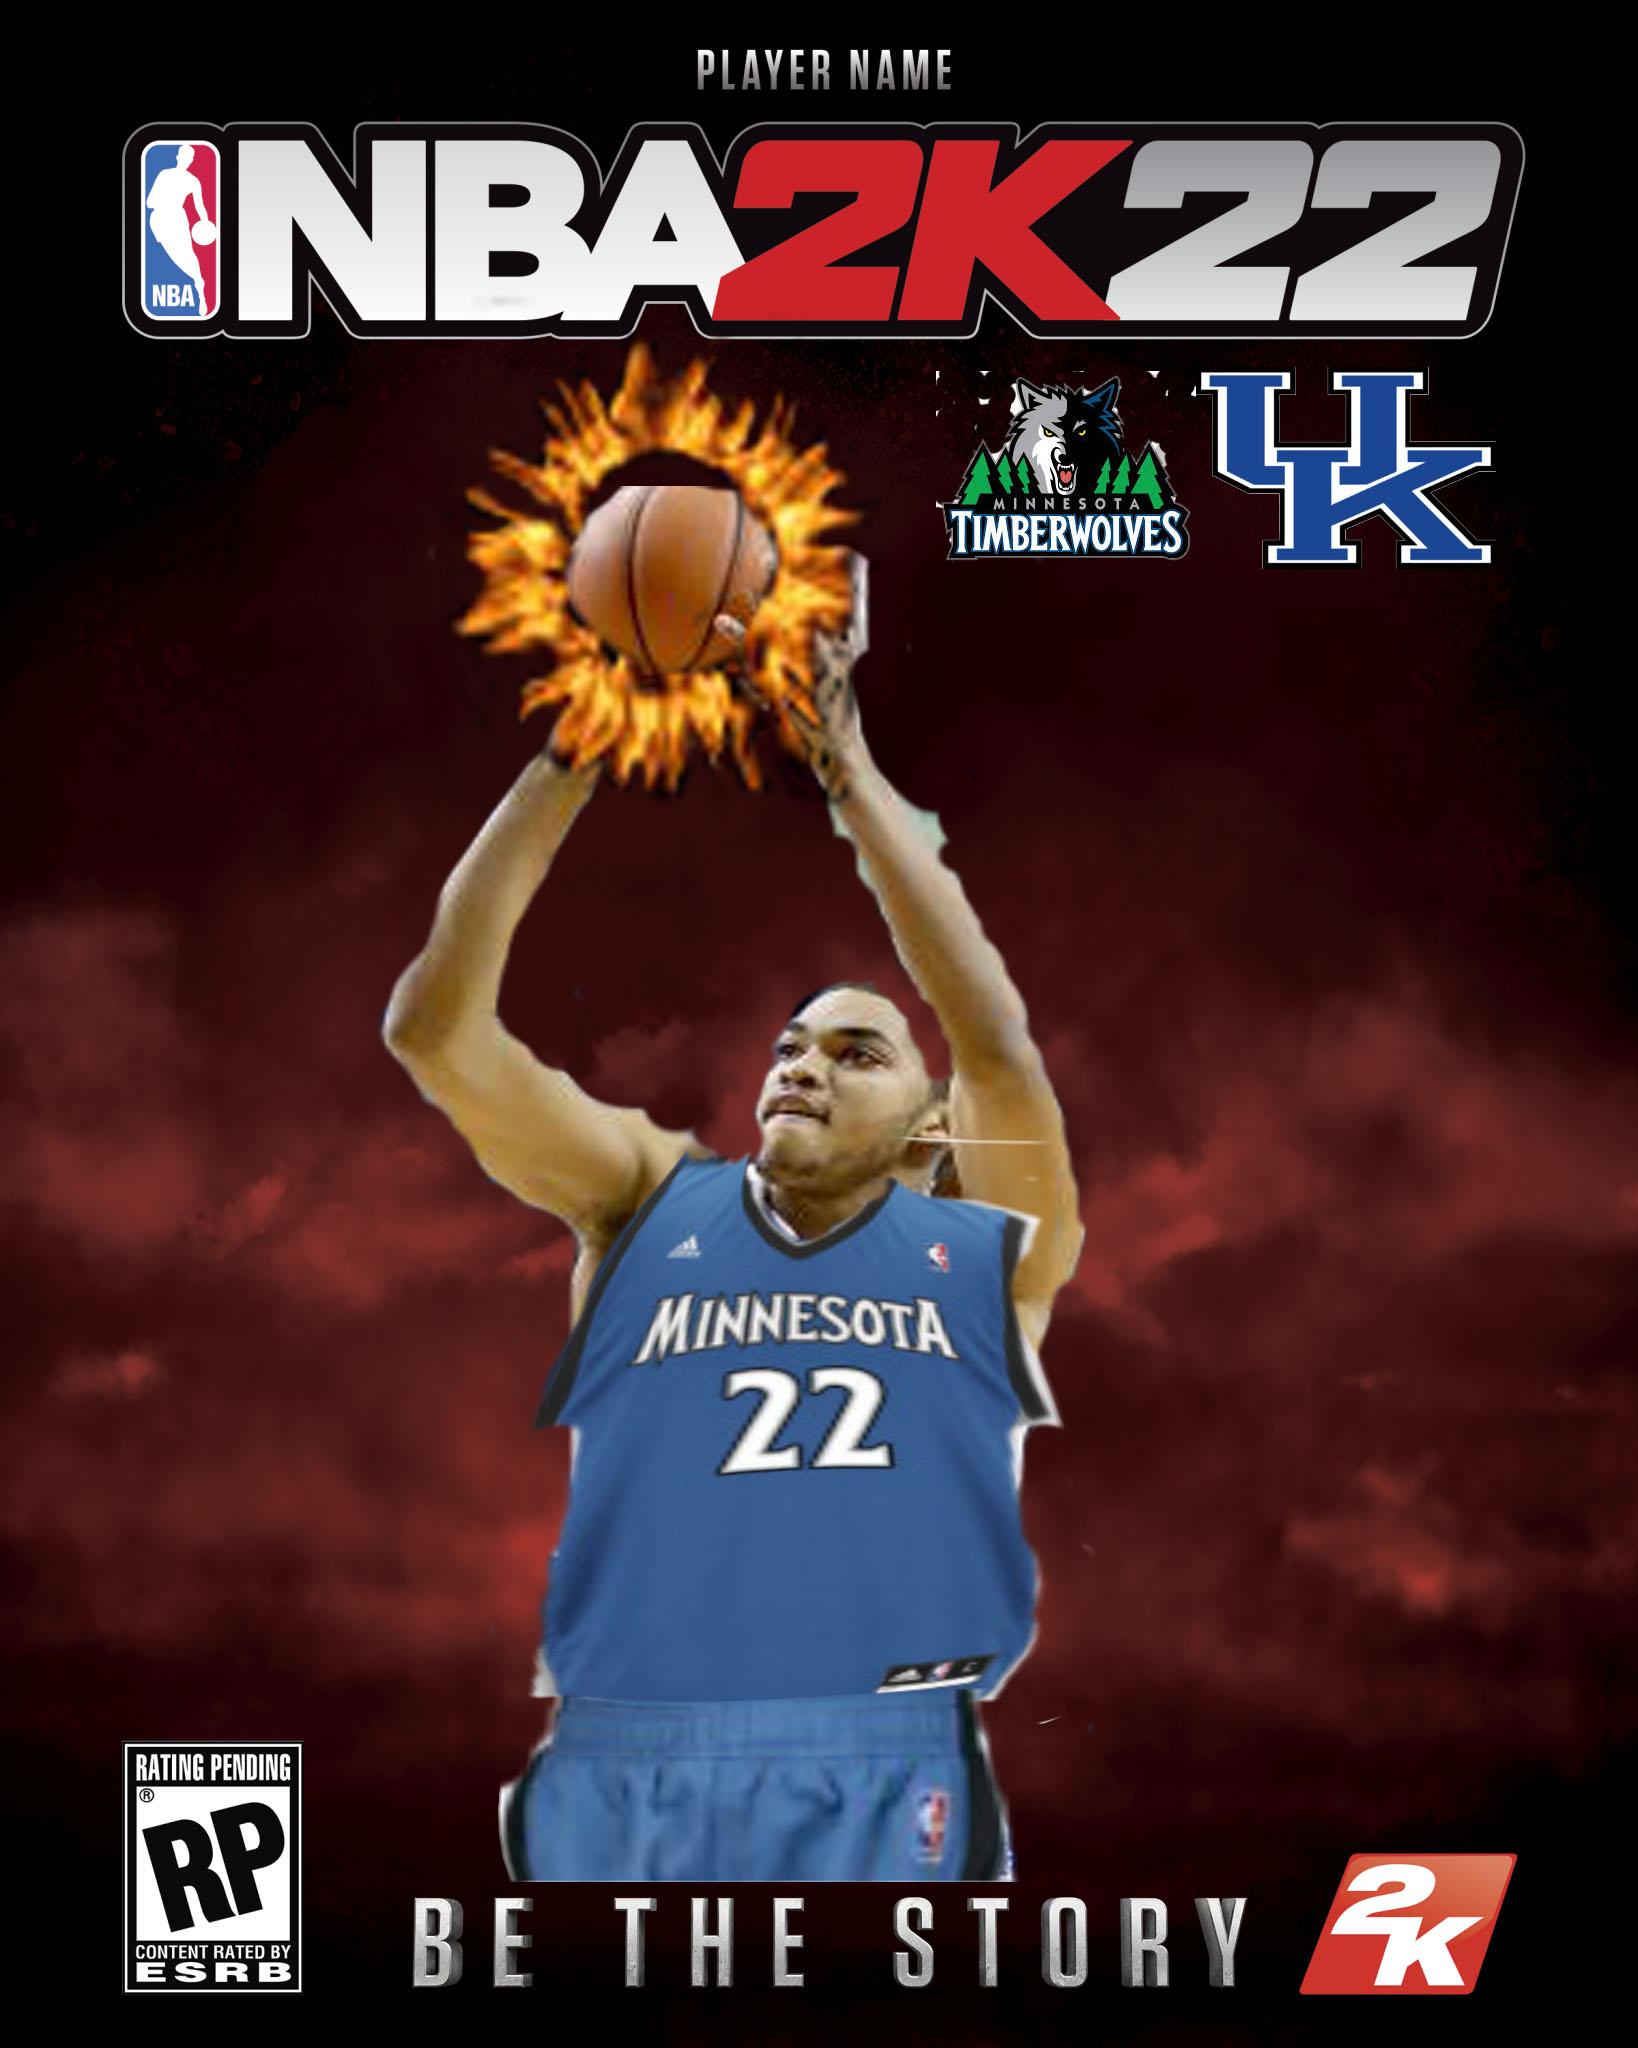 mike on Twitter: "NBA 2K22 cover @Ronnie2K @NBA2K @LD2K http://t.co